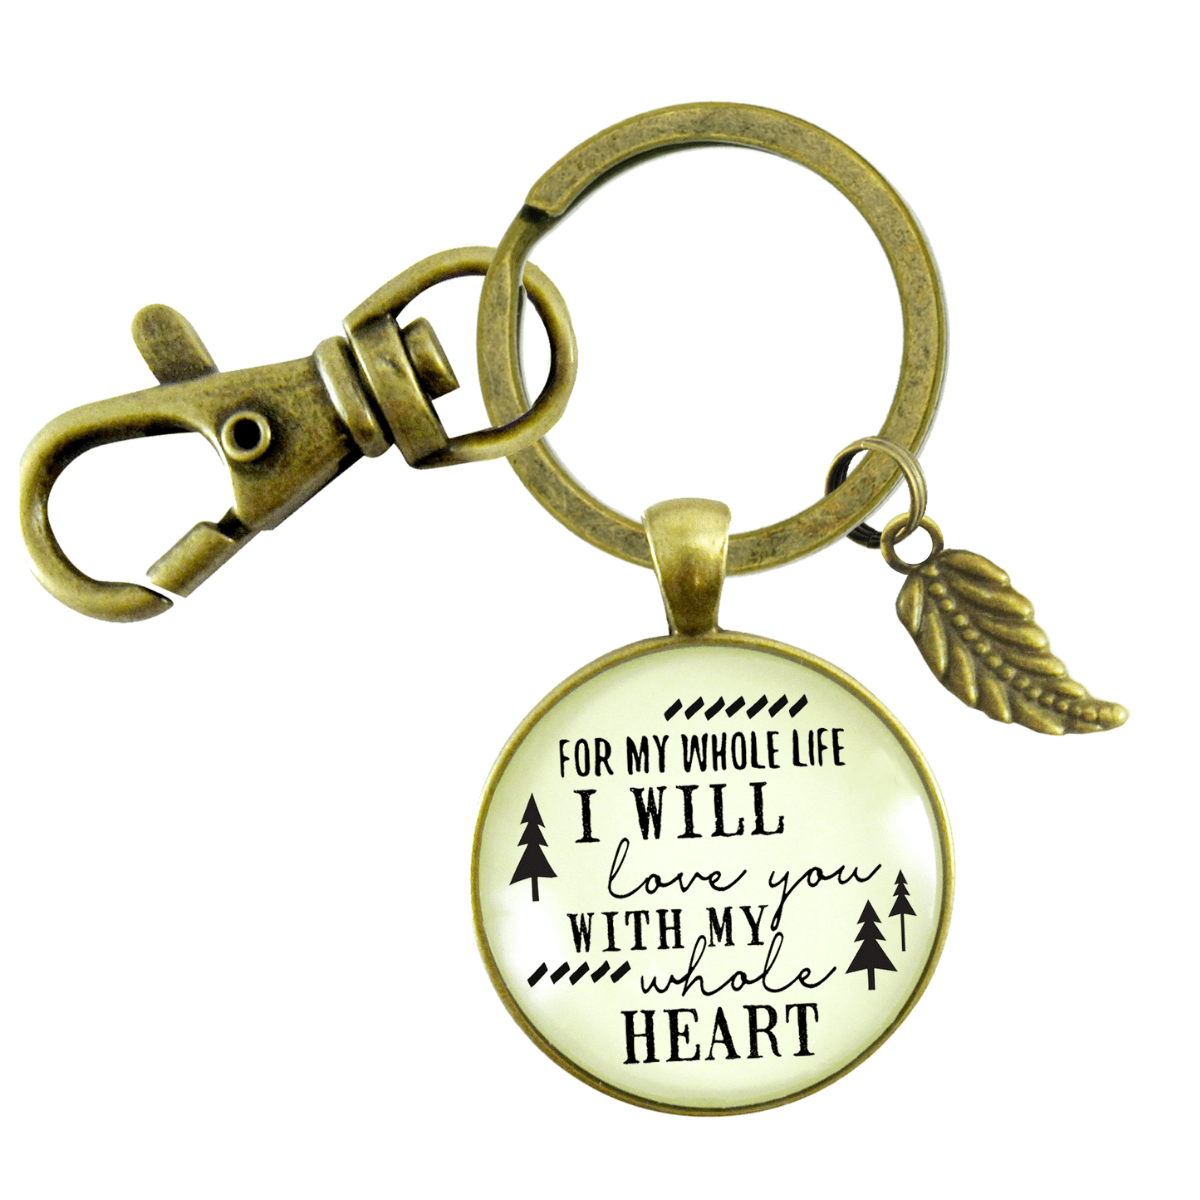 21 Years Brass Wedding Anniversary Keychain Gift Idea for Wife or Husband -  21 Years Heart - Wedding Themes Twenty First for Him or Her